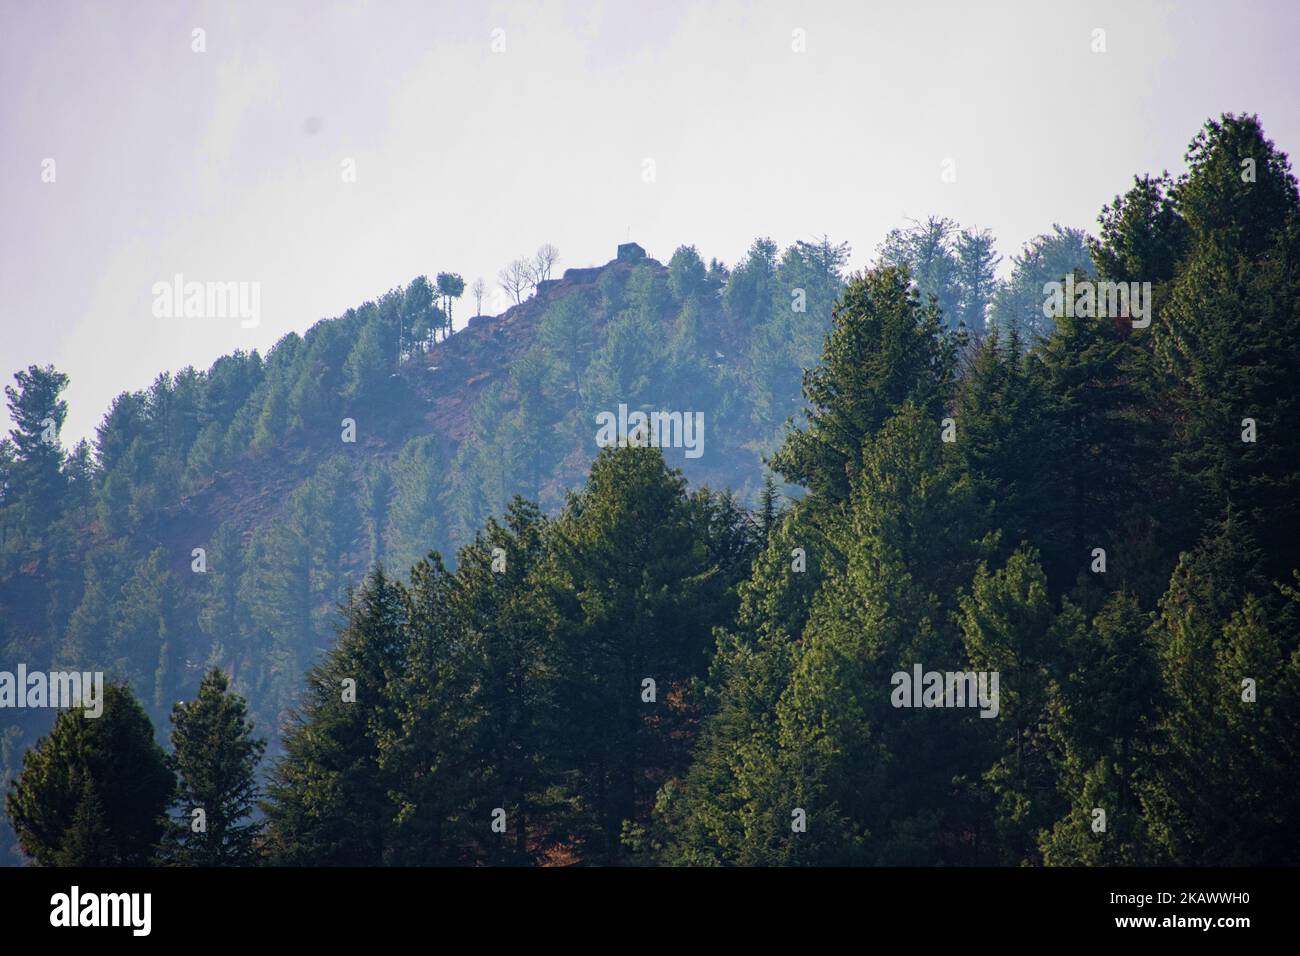 URI, KASHMIR, INDIA - FEBRUARY 27: Bunkers of Pakistan army can be seen from Indian controlled Kashmir during a fresh skirmish along the border on February 27, 2018 in Uri, 120 Kms (75 miles) north west of Srinagar , the summer capital of Indian administered Kashmir, India. The village with a population of a little over 12,000 has been bearing the brunt of cross-fire between nuclear rivals India and Pakistan. People living along the ceasefire line dividing Kashmir into India and Pakistan-administered portions have continually been at risk due to hostility between the armies of the two nuclear  Stock Photo